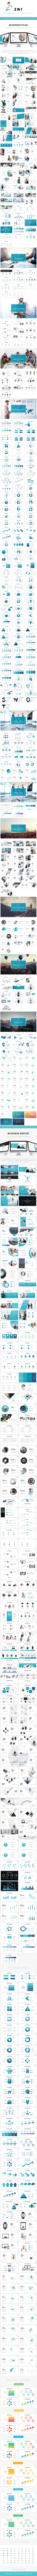 Bundle 2 in 1 Clean & Effective Business Powerpoint Template